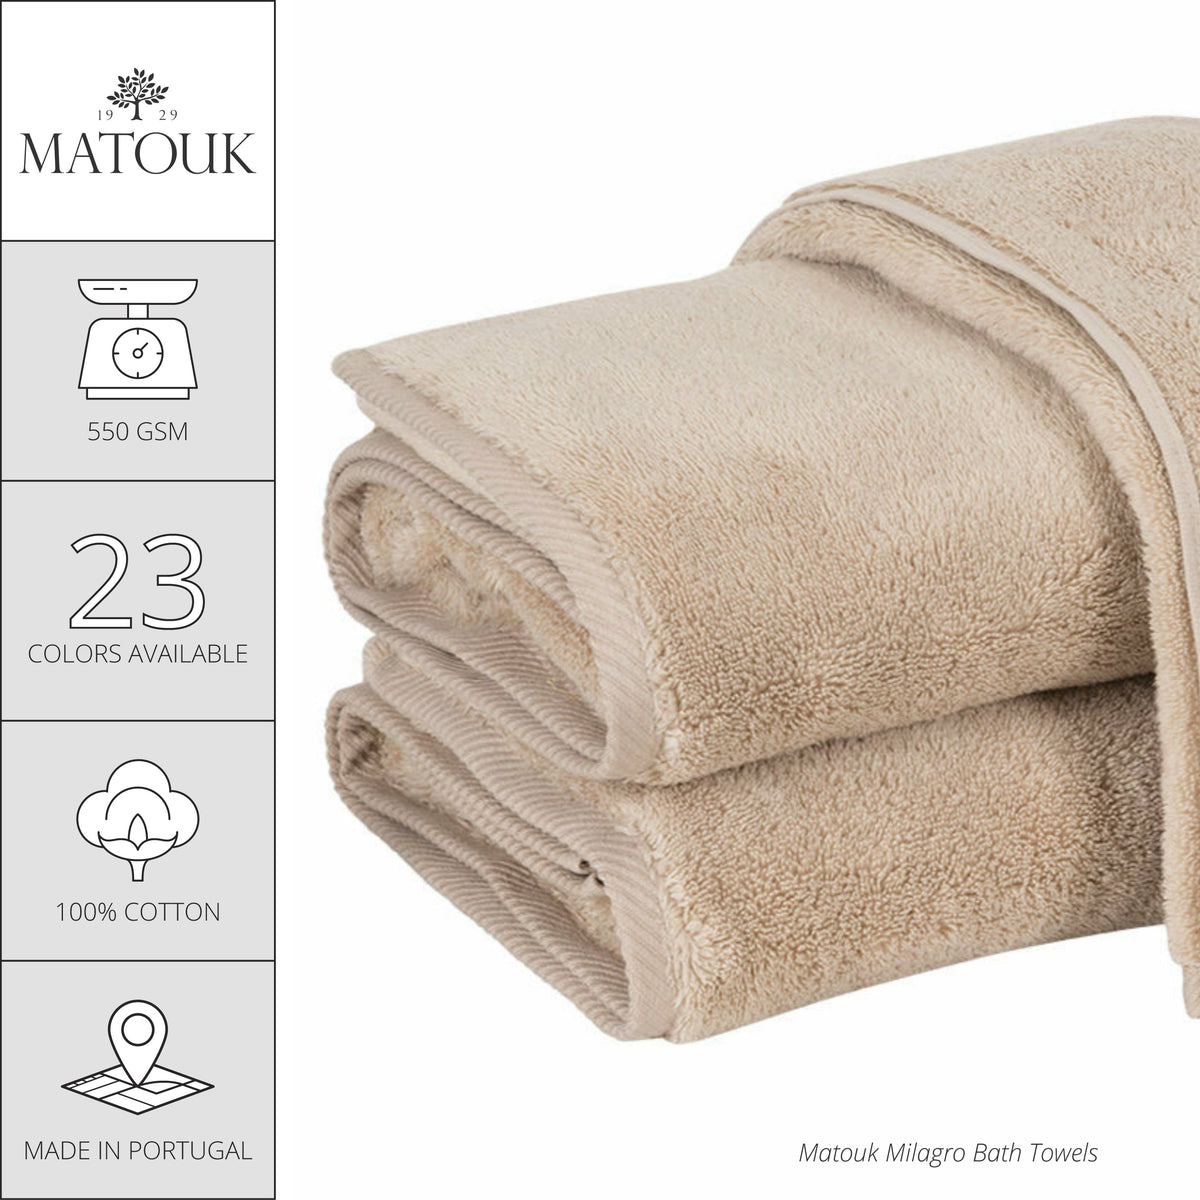 Matouk Milagro Bath Towels and Mats - Sterling